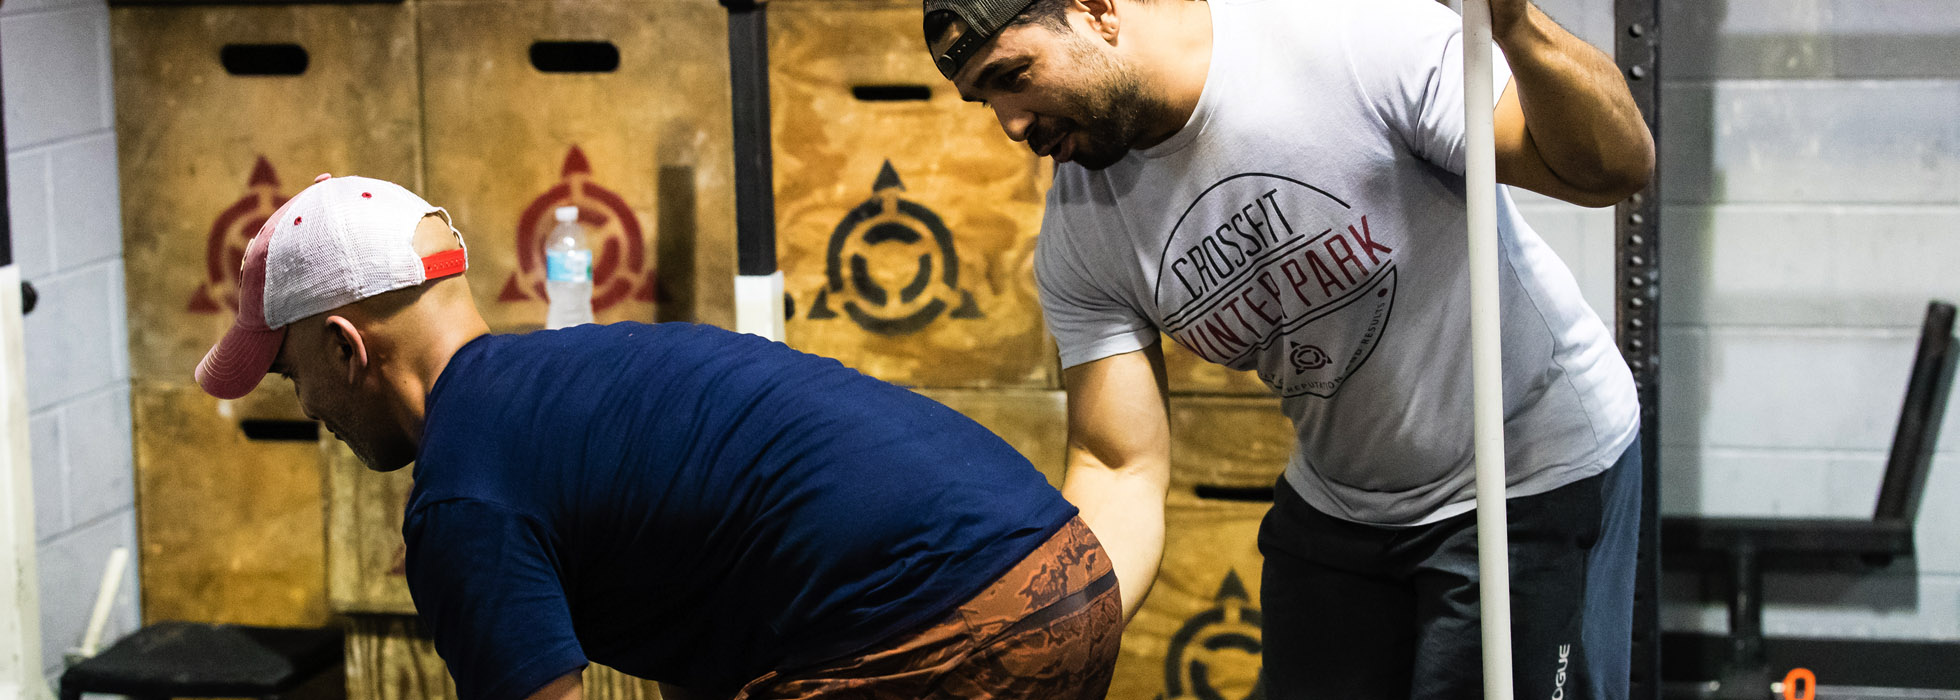 11Learn CrossFit Basics at CrossFit Winter Park Gym in Maitland and Surrounding Orlando Areas